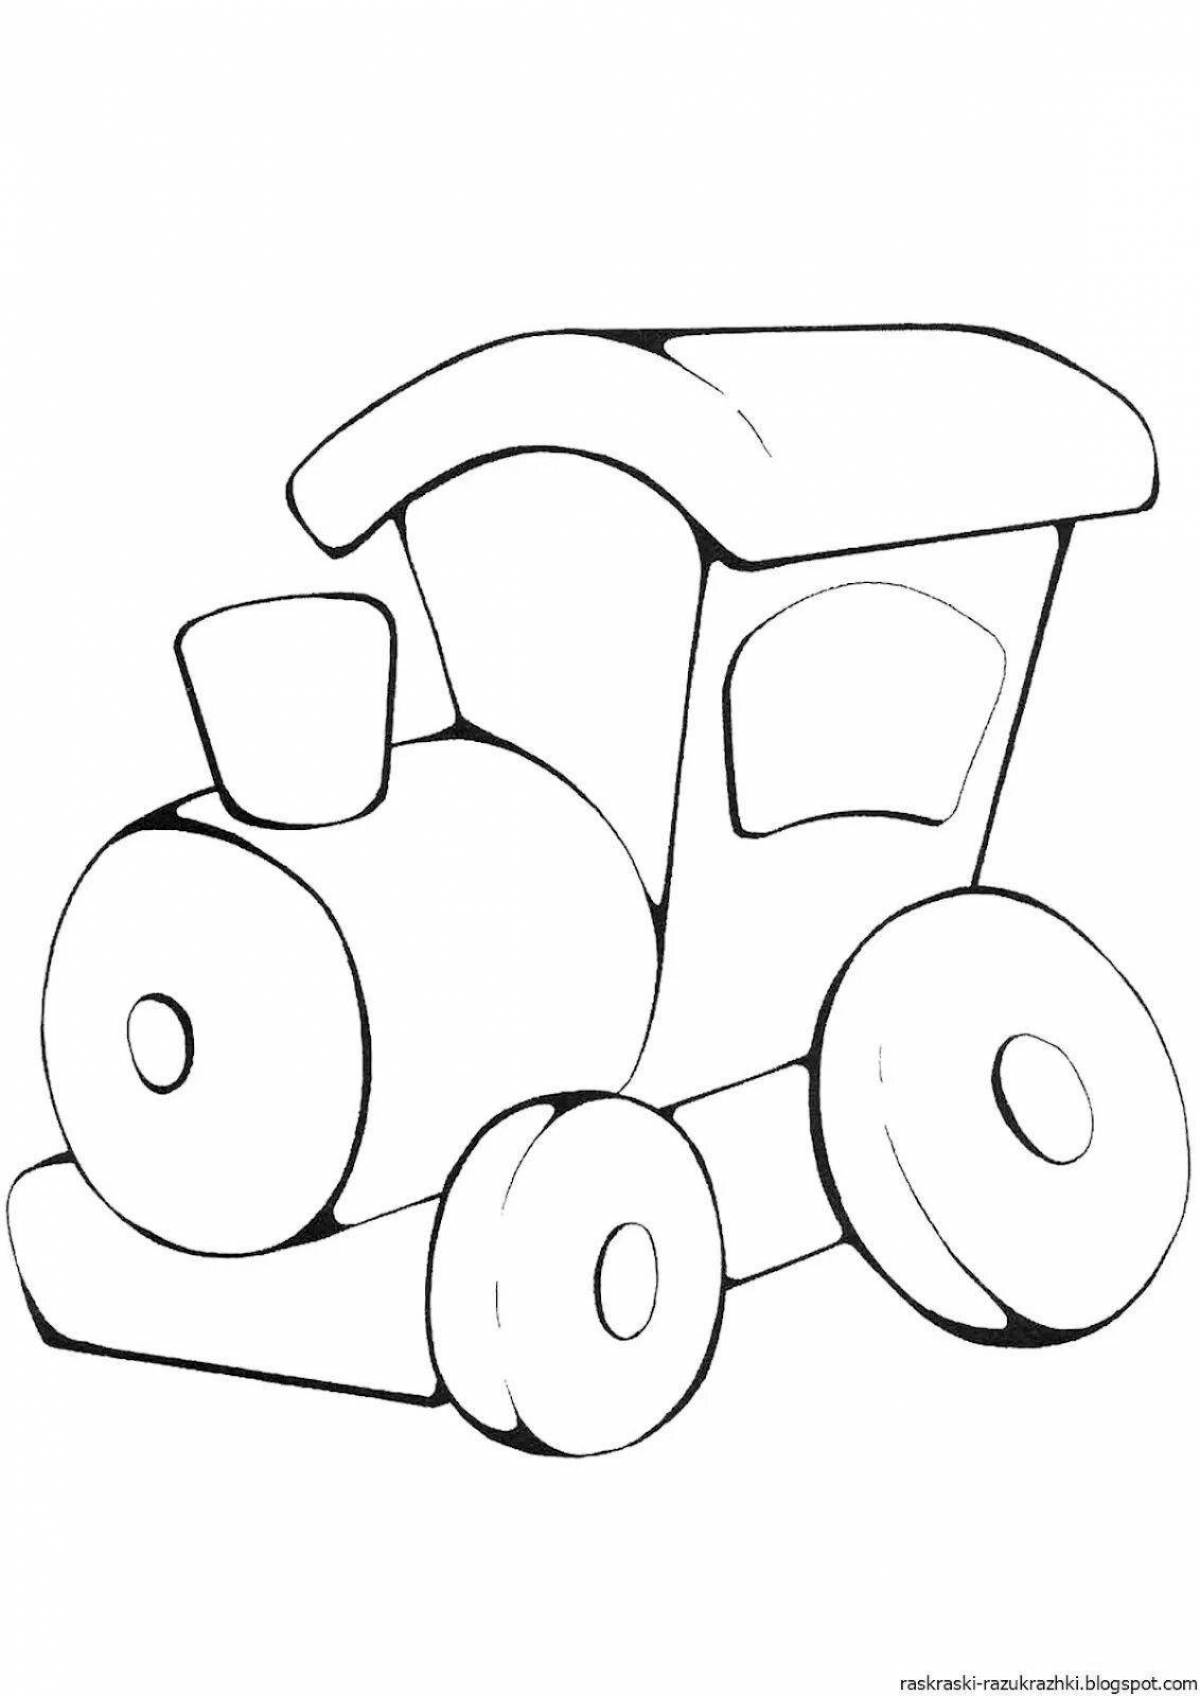 Amazing steam locomotive coloring page for kids